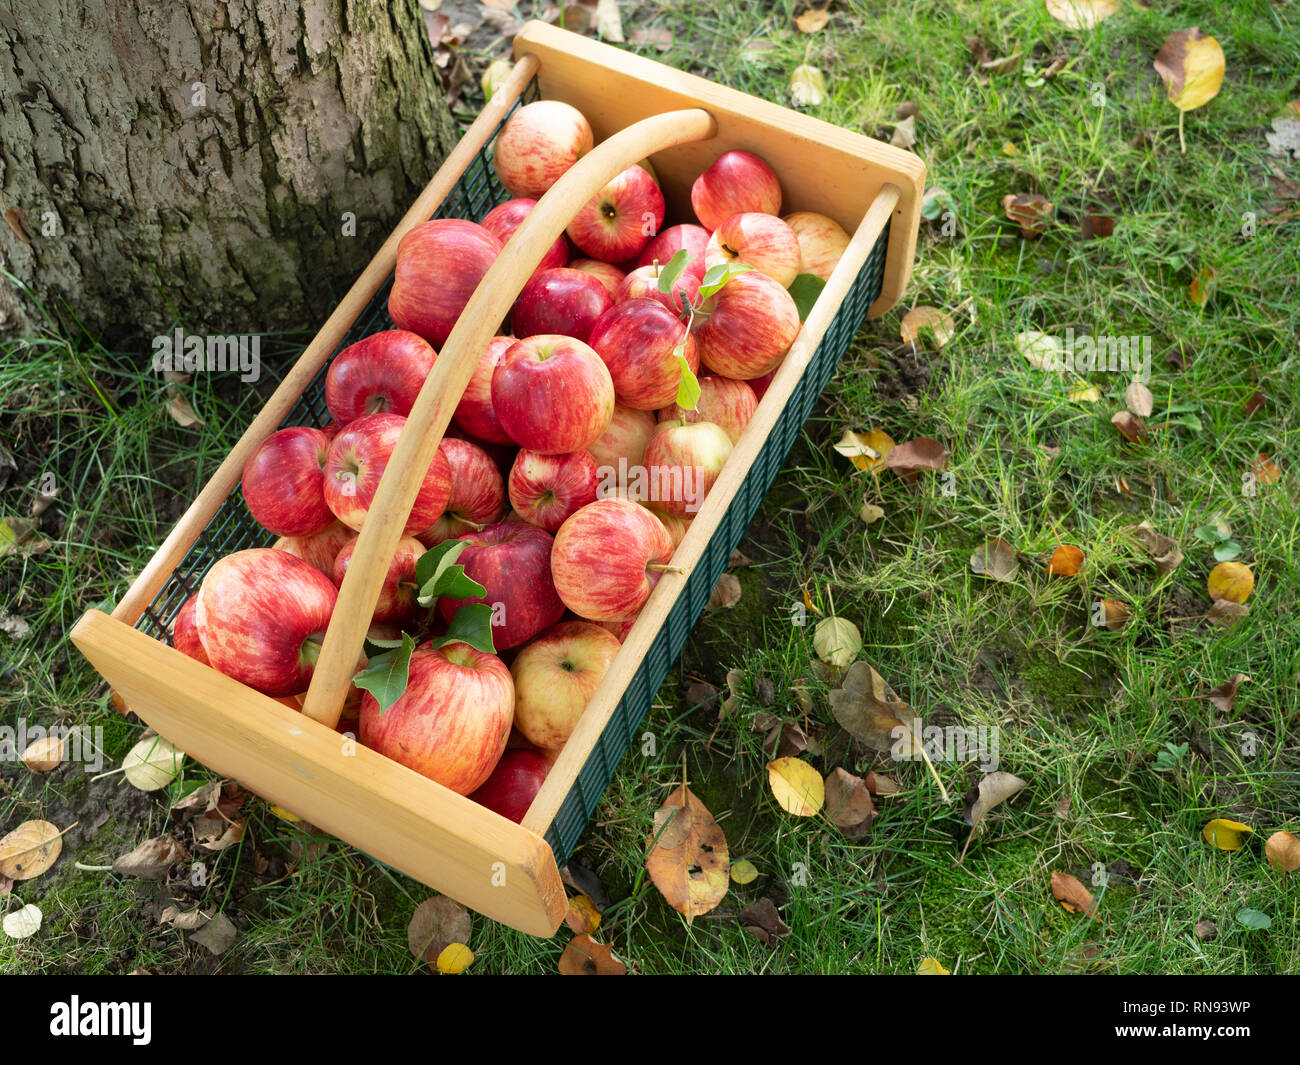 Wire basket with wooden handle holding freshly picked red and yellow apples sitting on green grass next to a tree trunk. Stock Photo